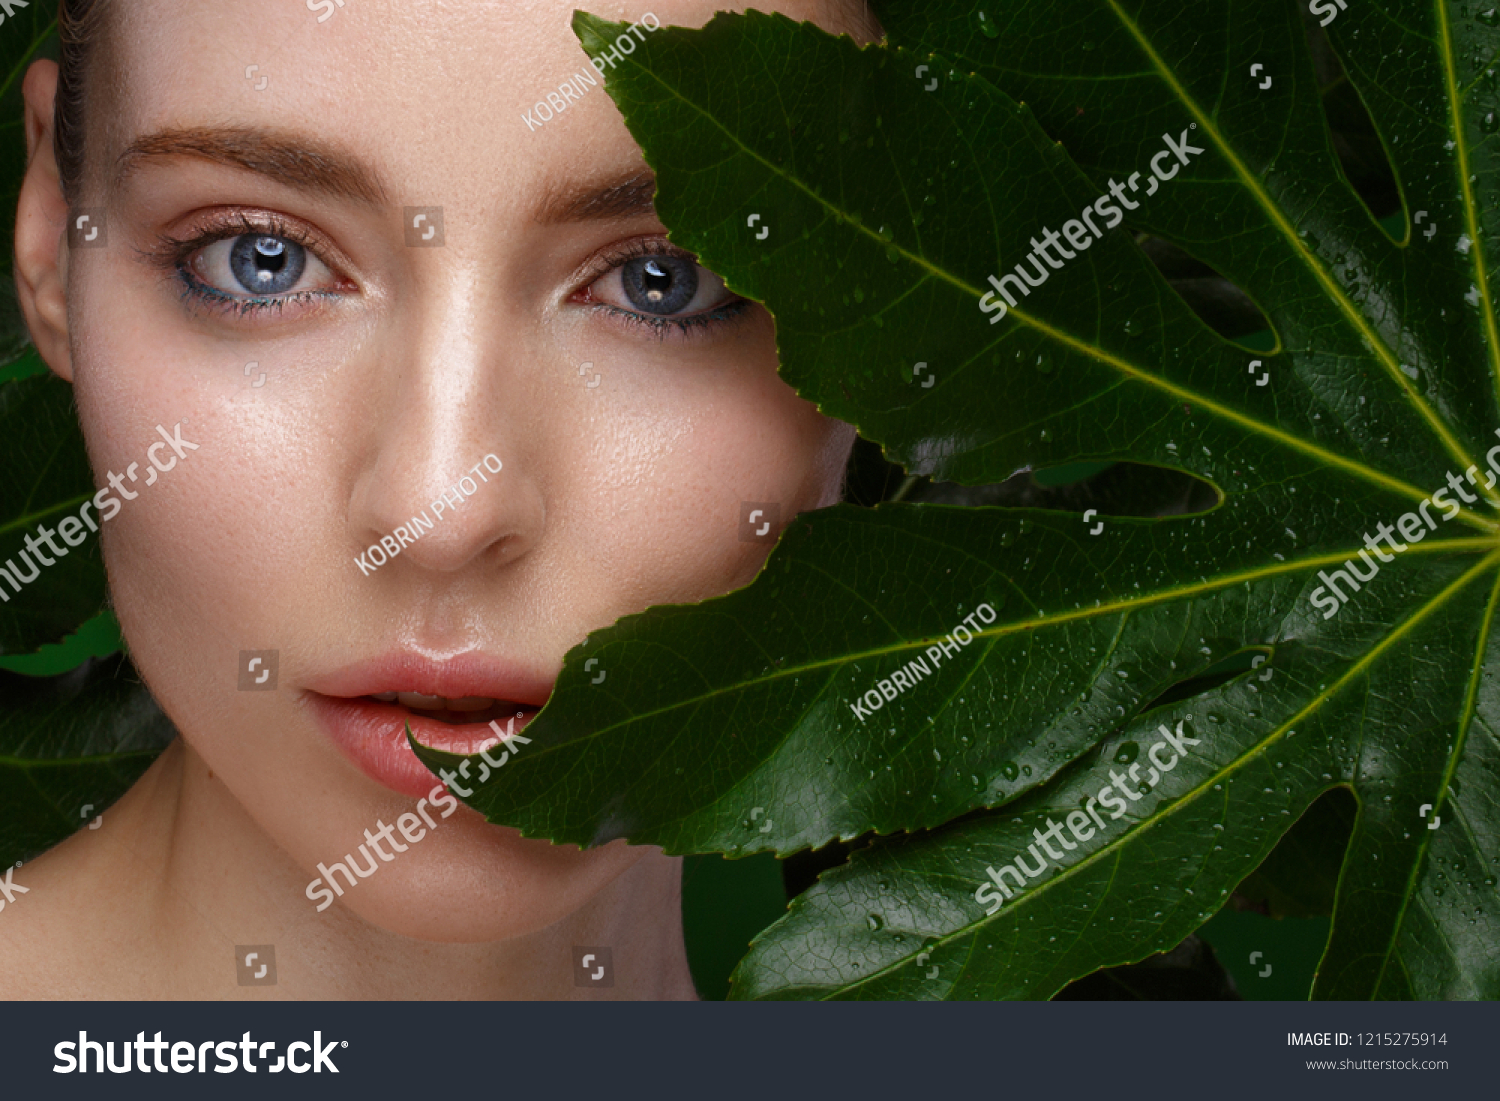 Beautiful fresh girl with perfect skin, natural make-up and green leaves. Beauty face. Photo taken in the studio. #1215275914